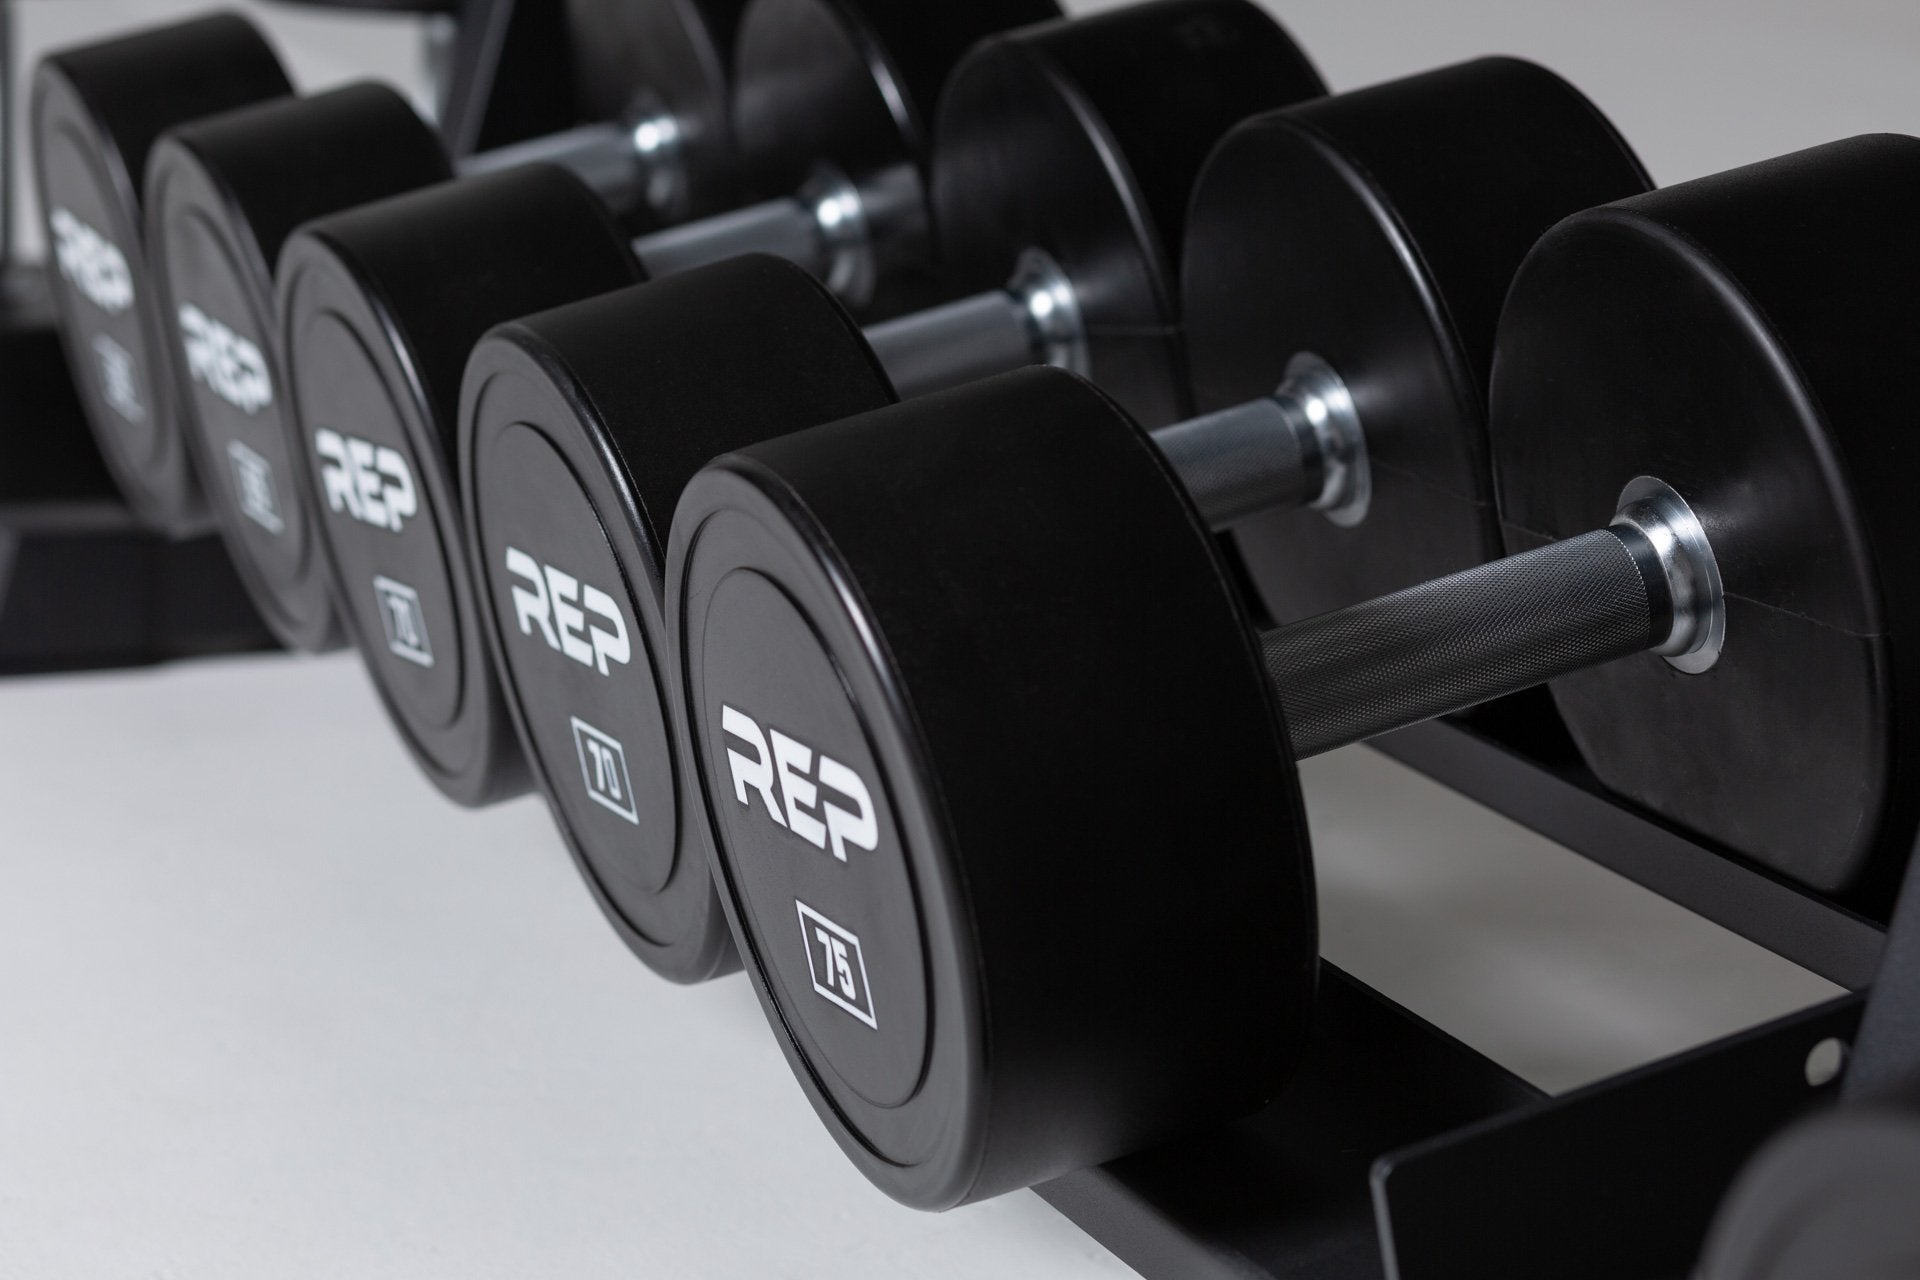 Close-up view of the 75lb pair of a 5-75lb Urethane Dumbbell Set being stored on the bottom shelf of a REP Dumbbell Rack.